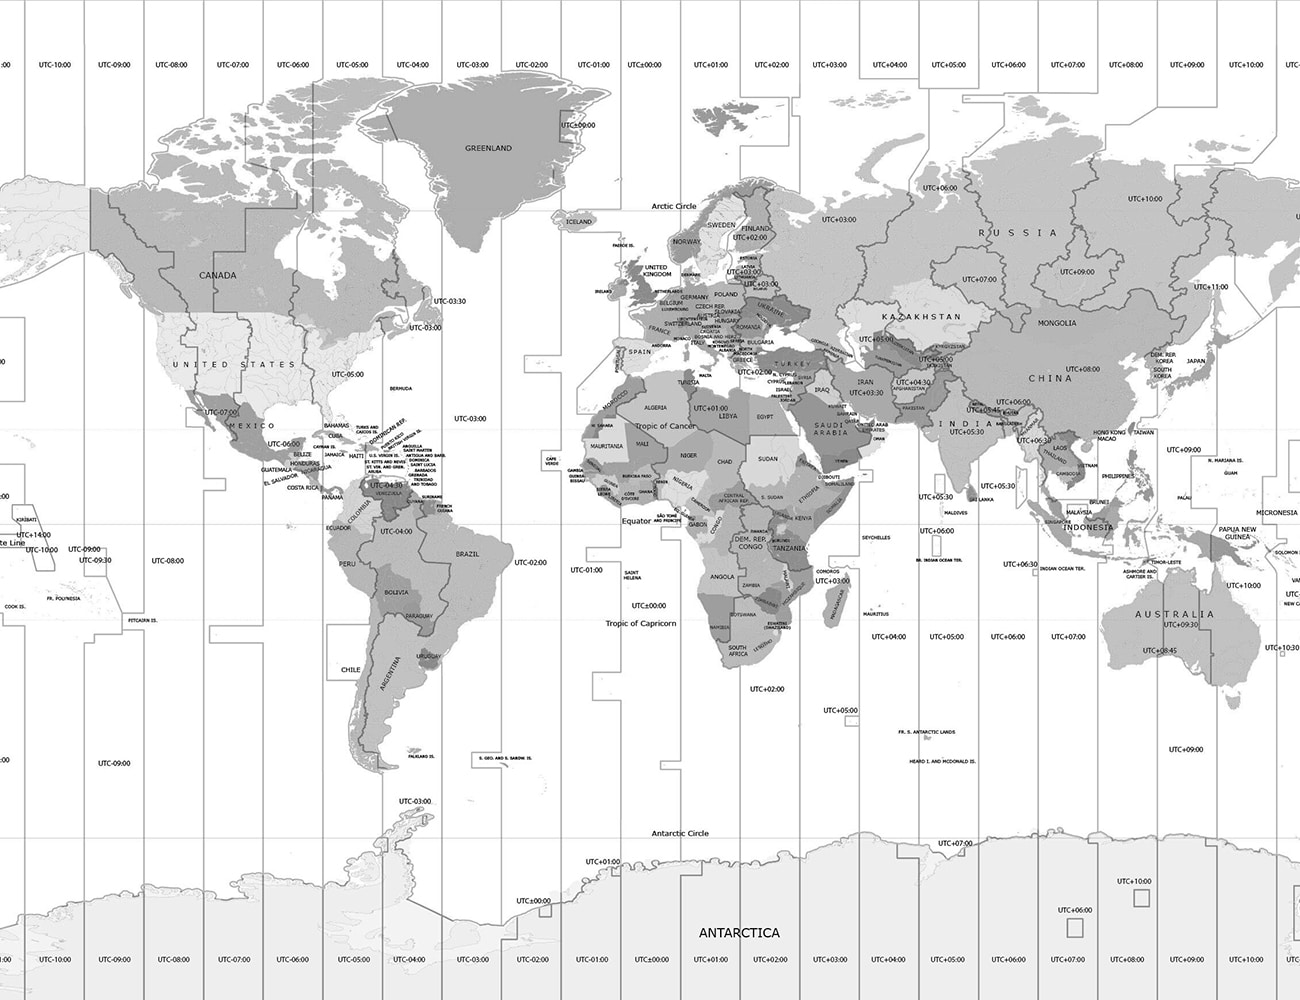 A Time Zone World Map